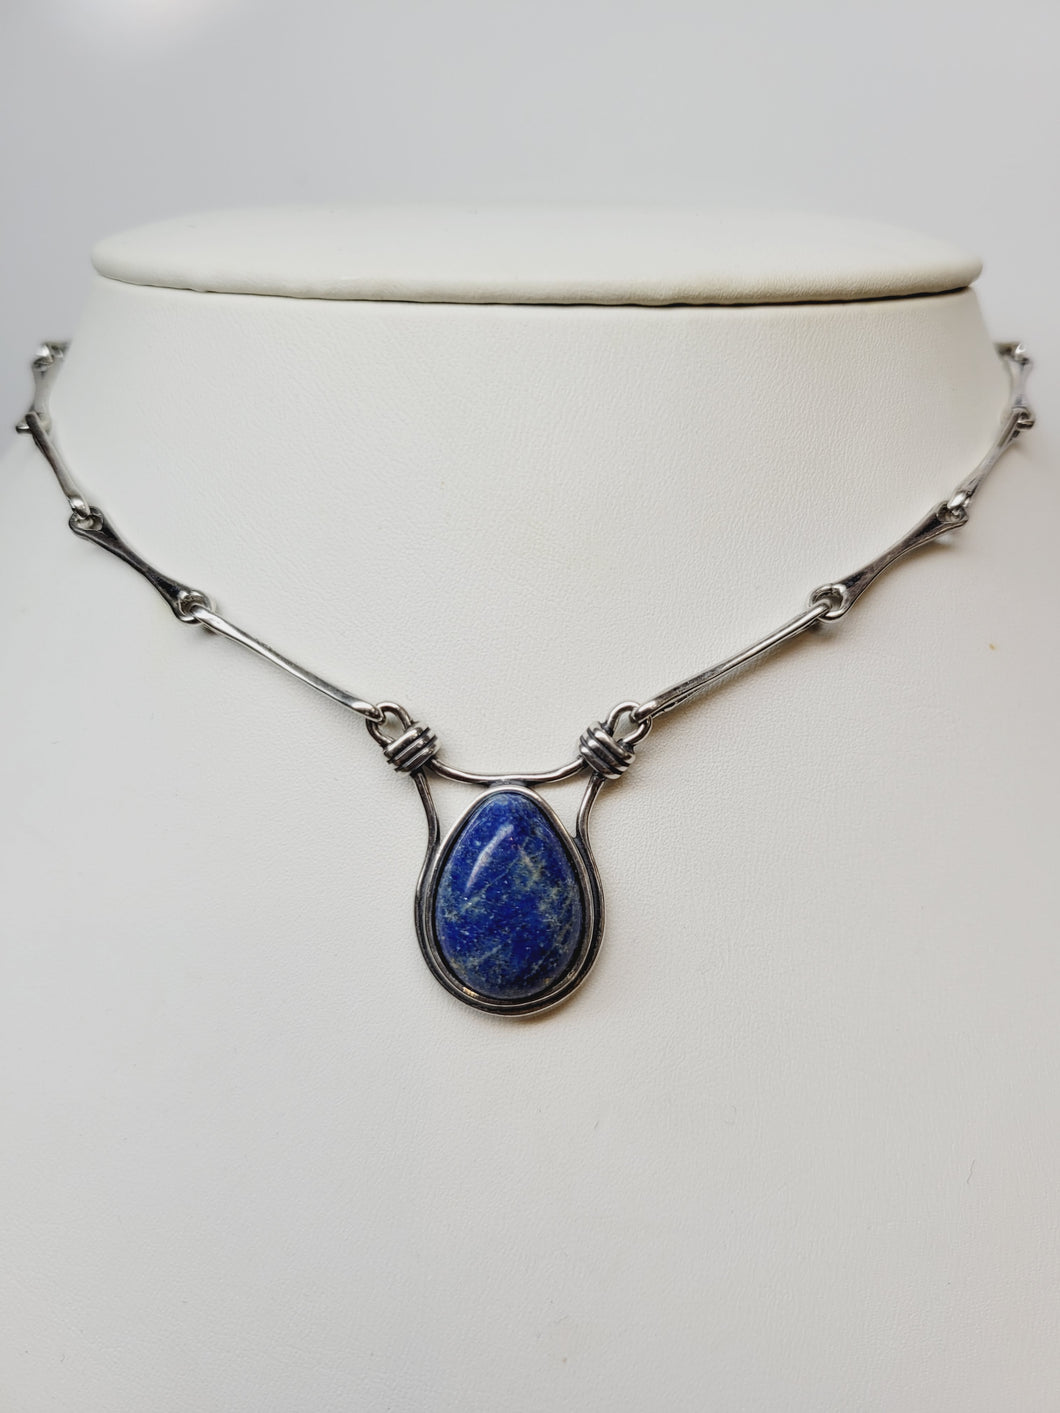 Lapis lazuli and sterling silver necklace with bar and link chain